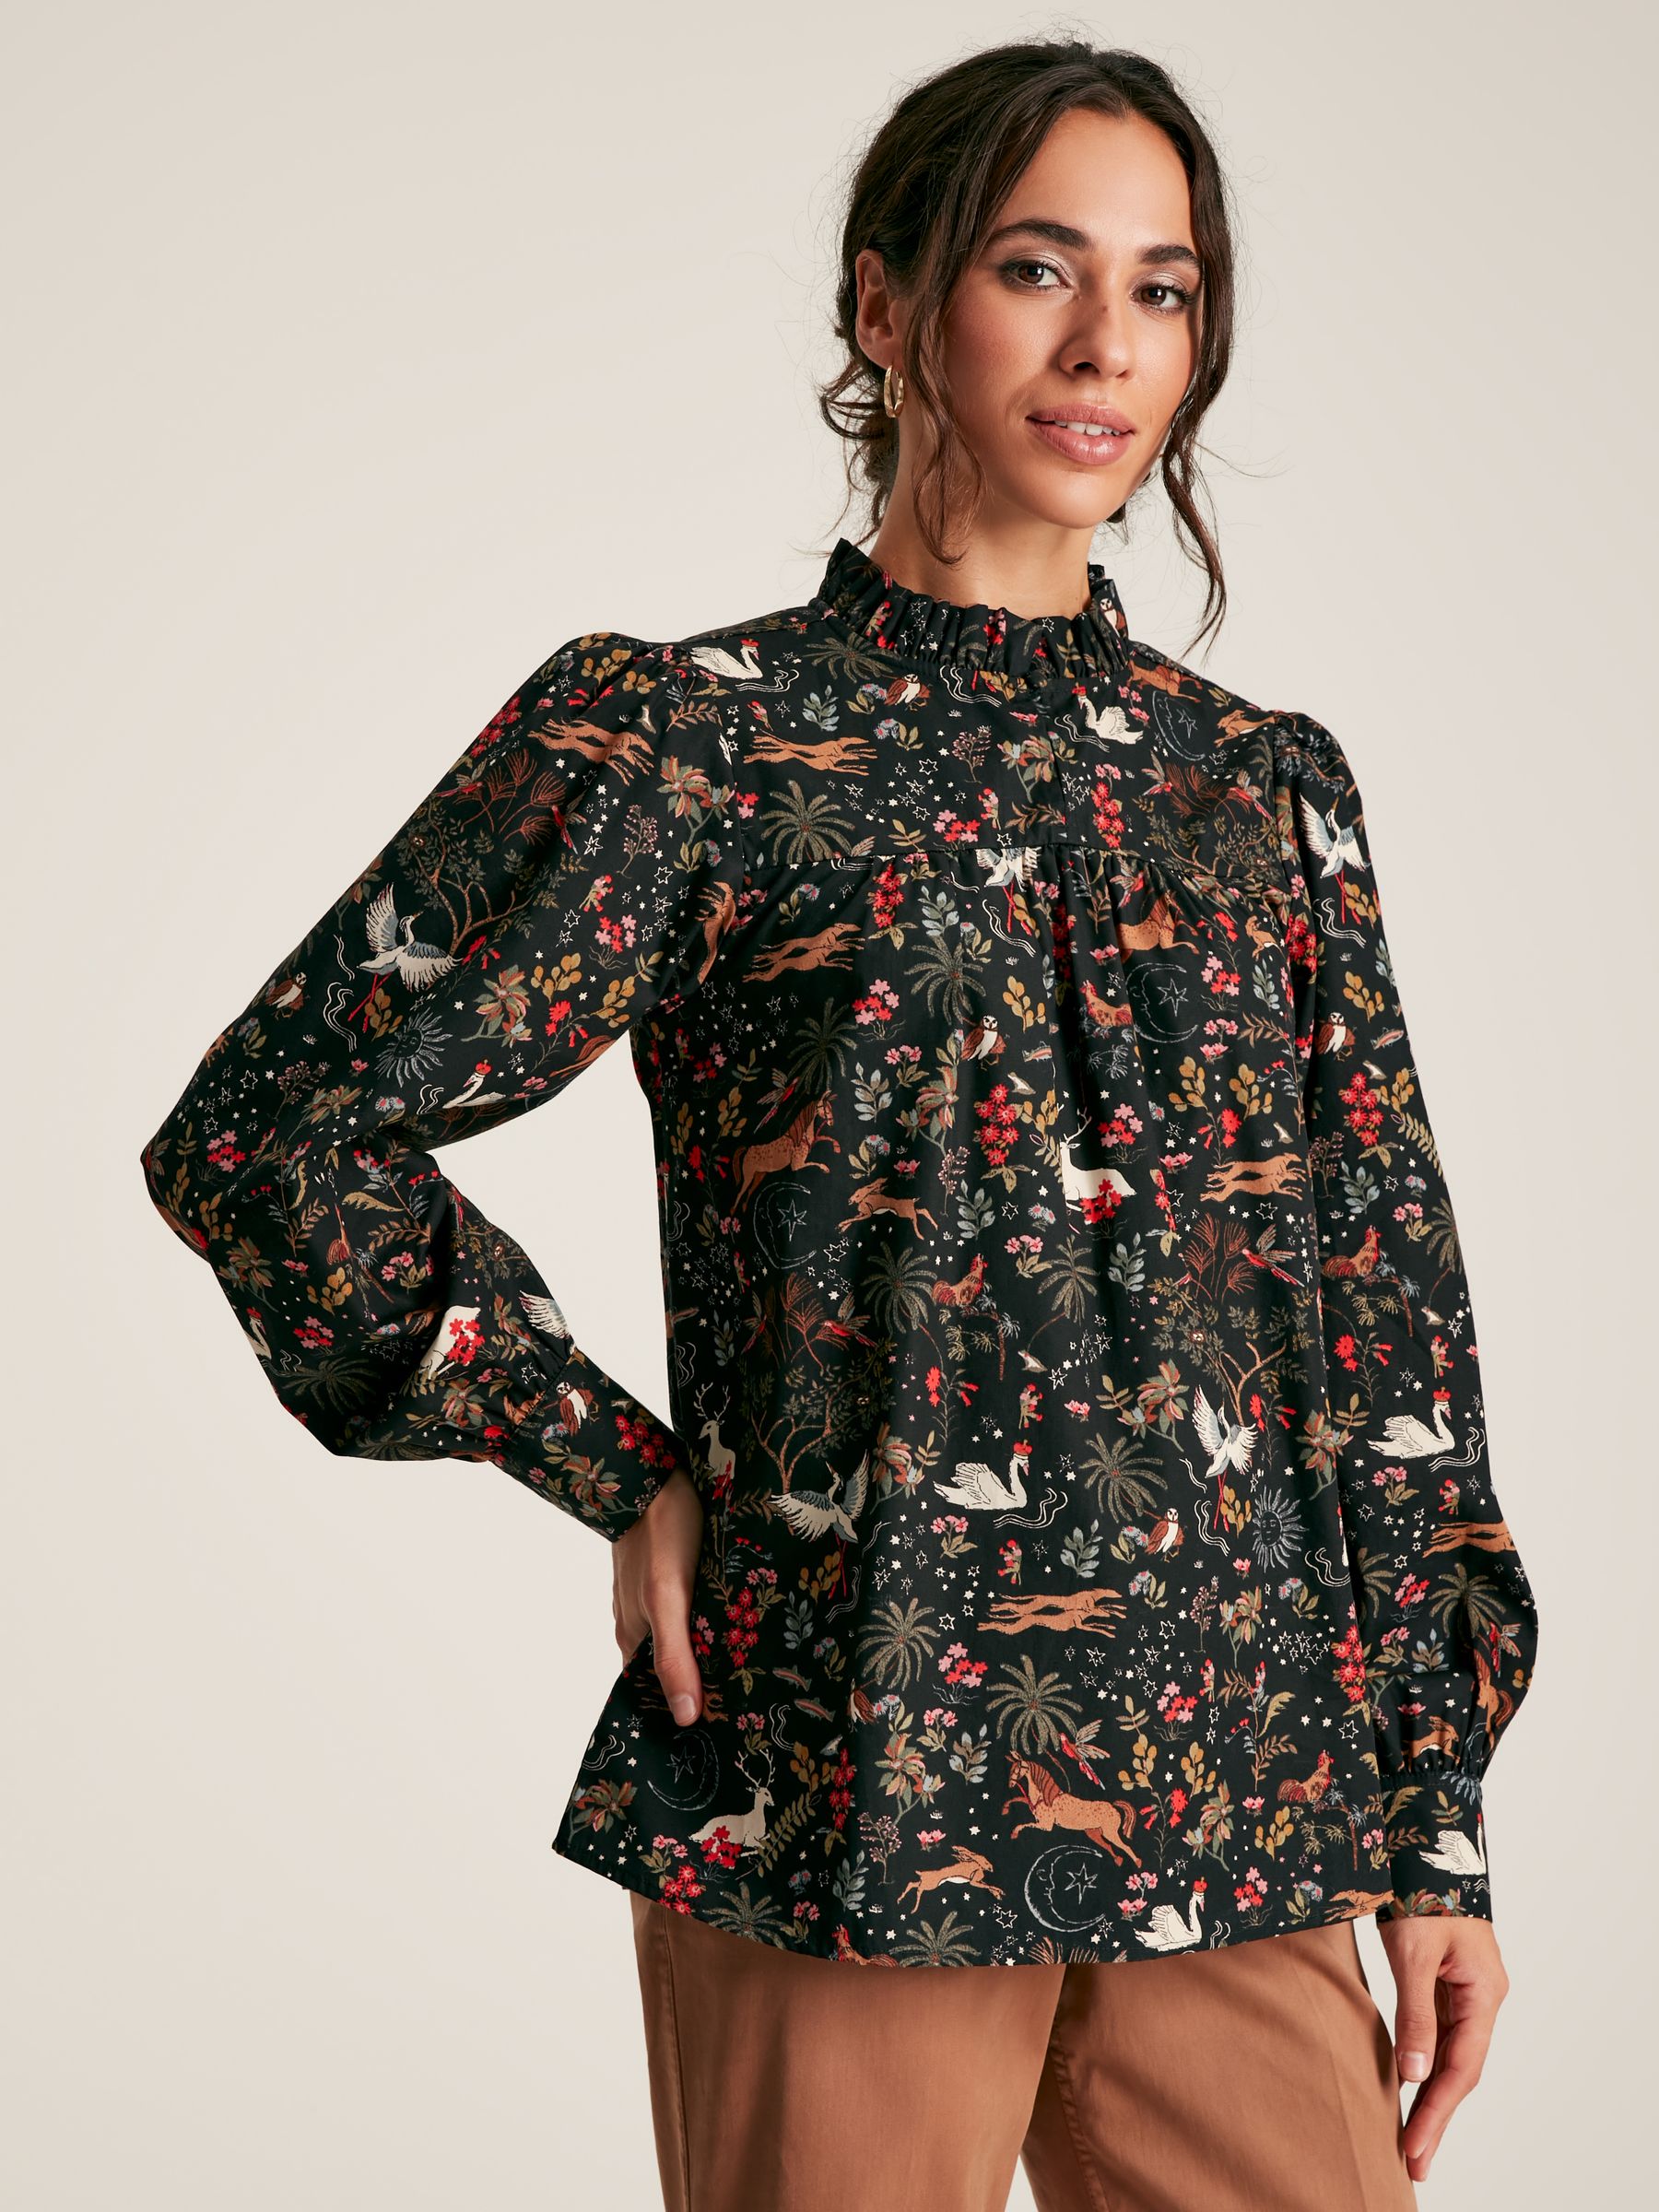 Buy Rhea Black Frill Neck Blouse from the Joules online shop